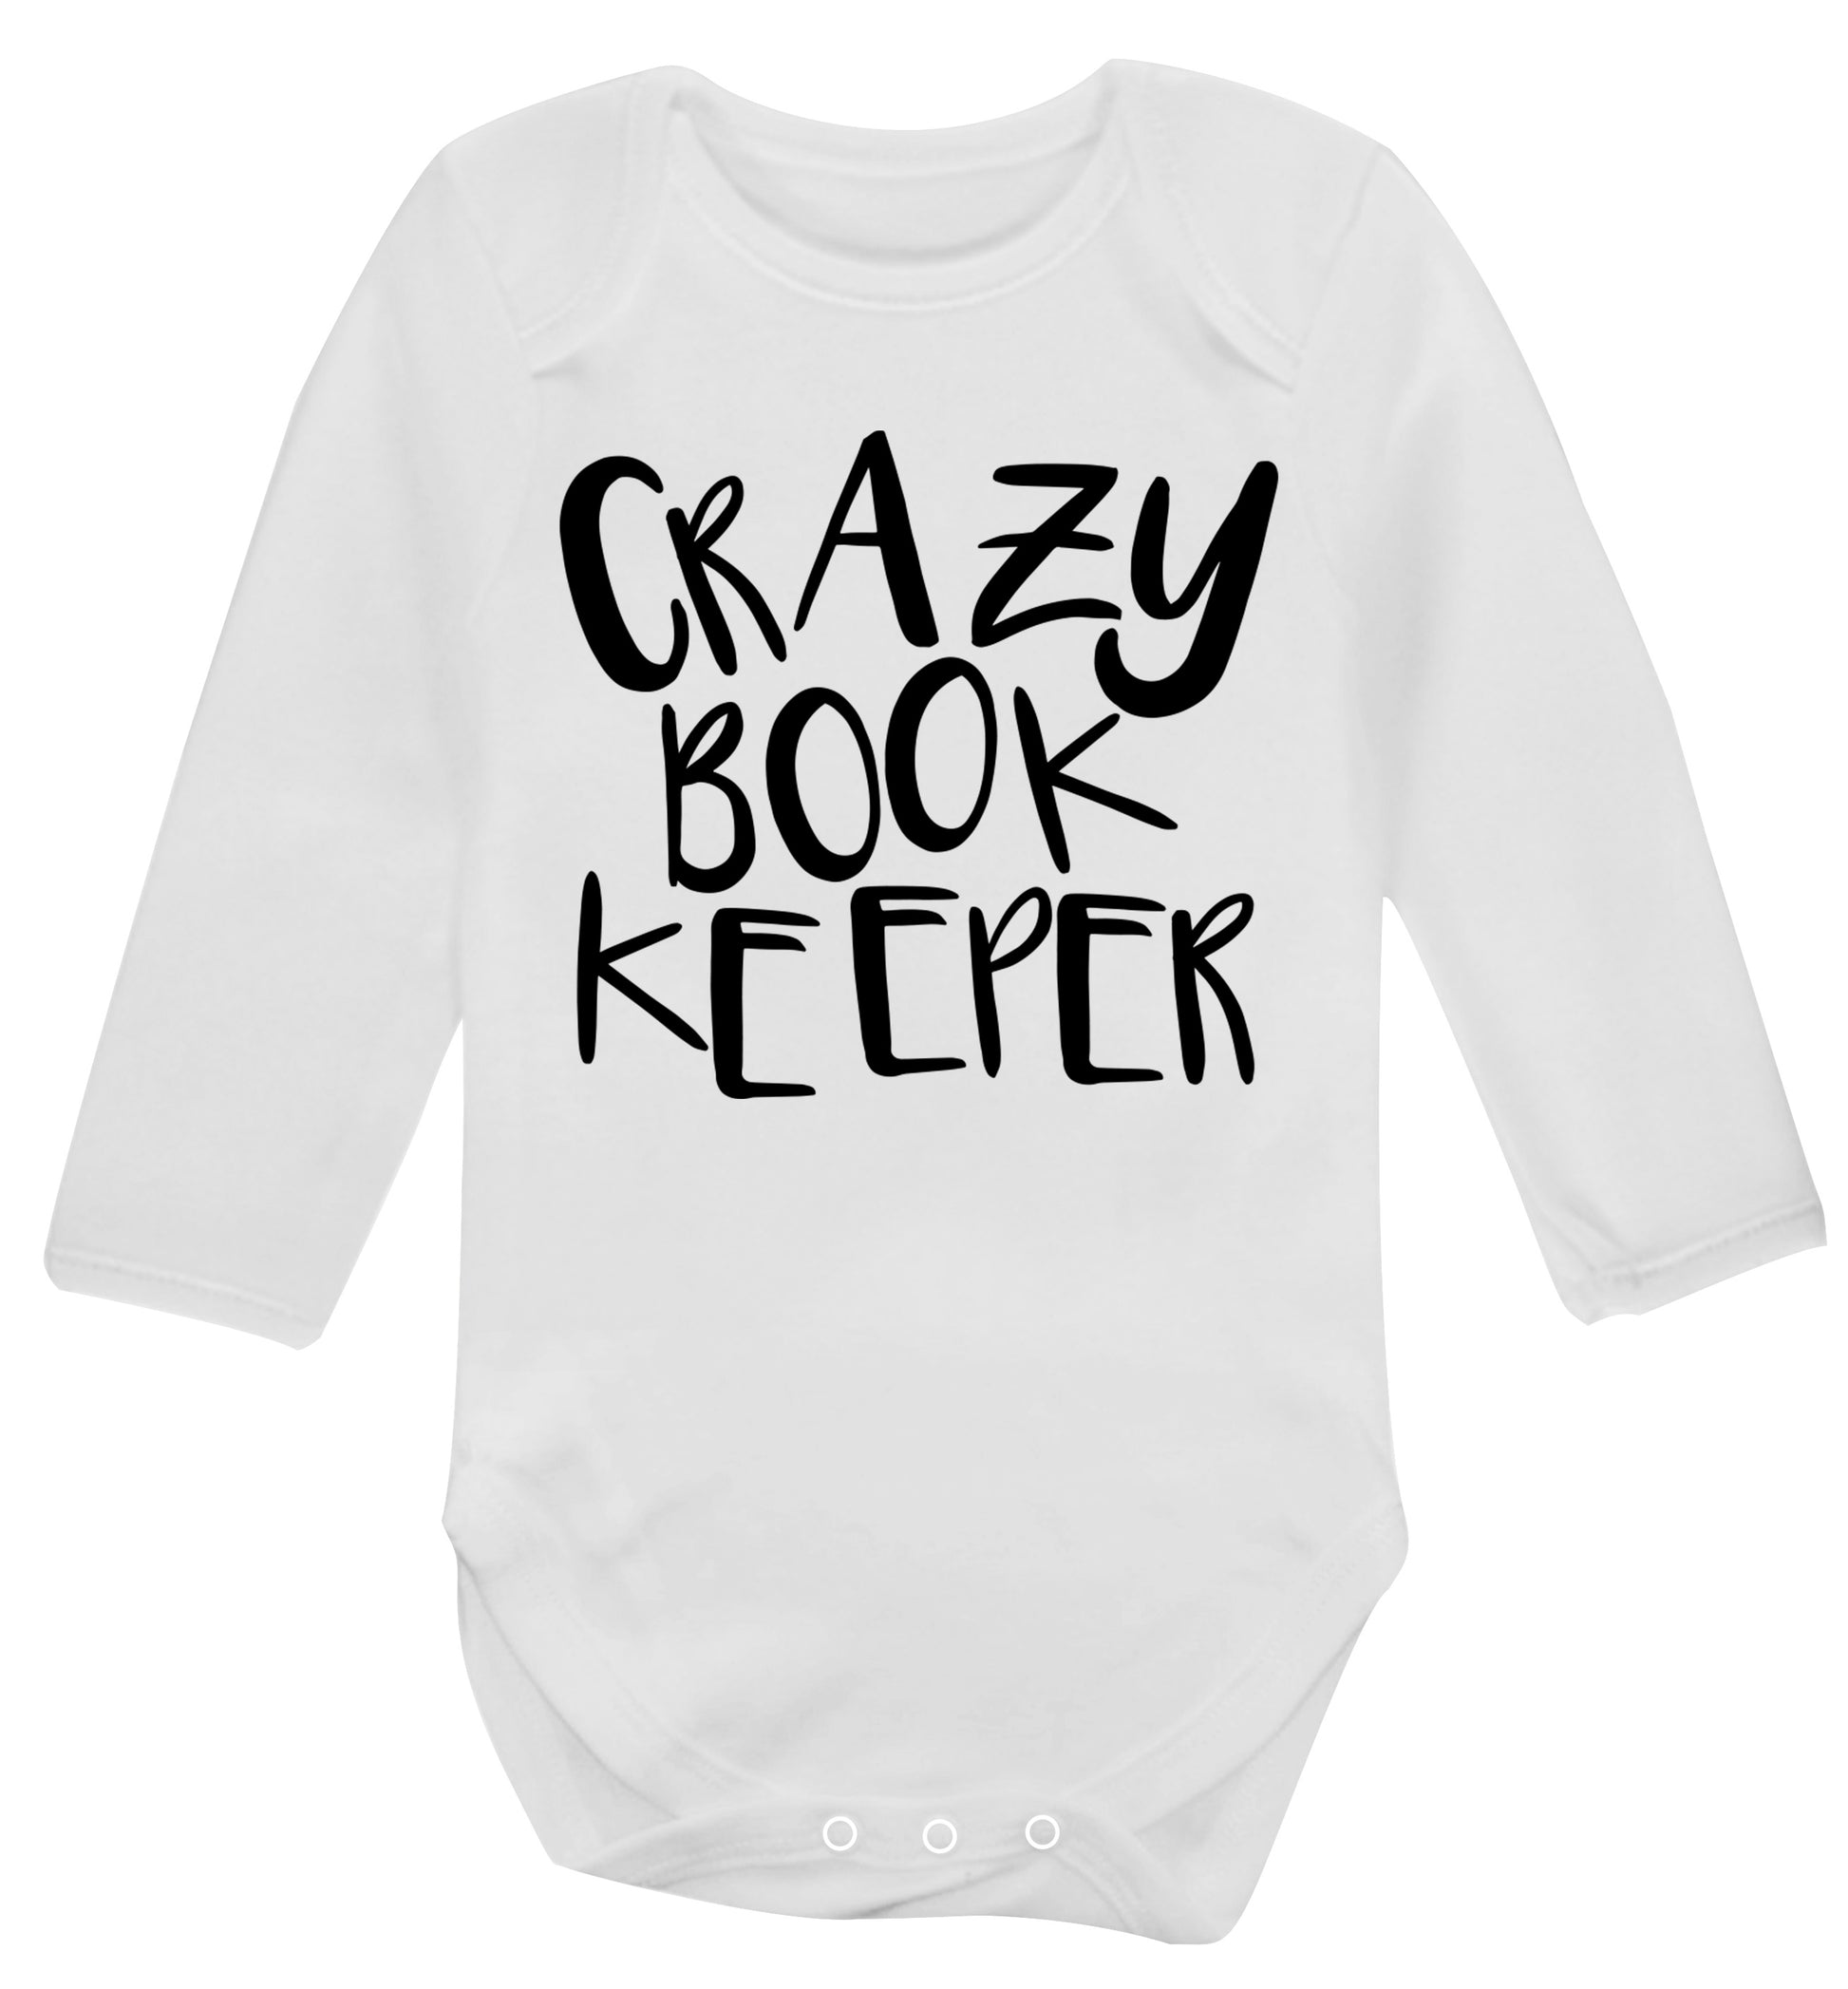 Crazy bookkeeper Baby Vest long sleeved white 6-12 months